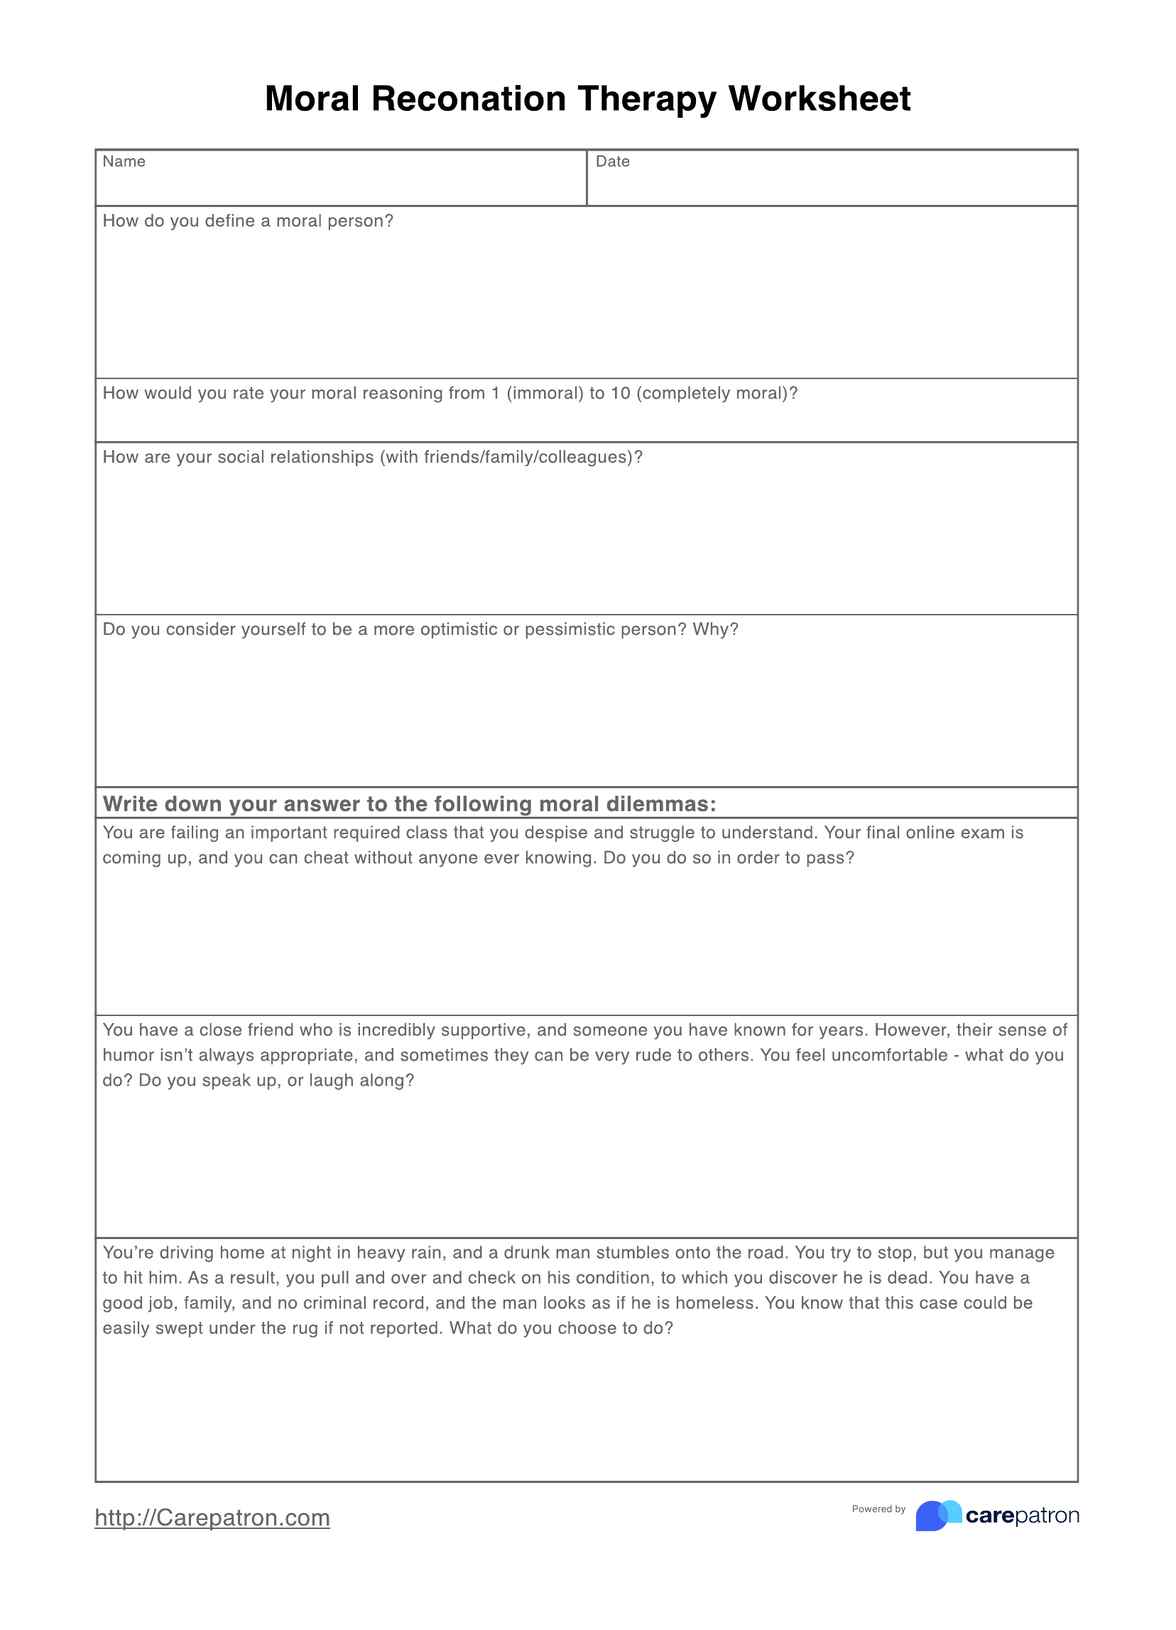 Moral Reconation Therapy Worksheets PDF Example